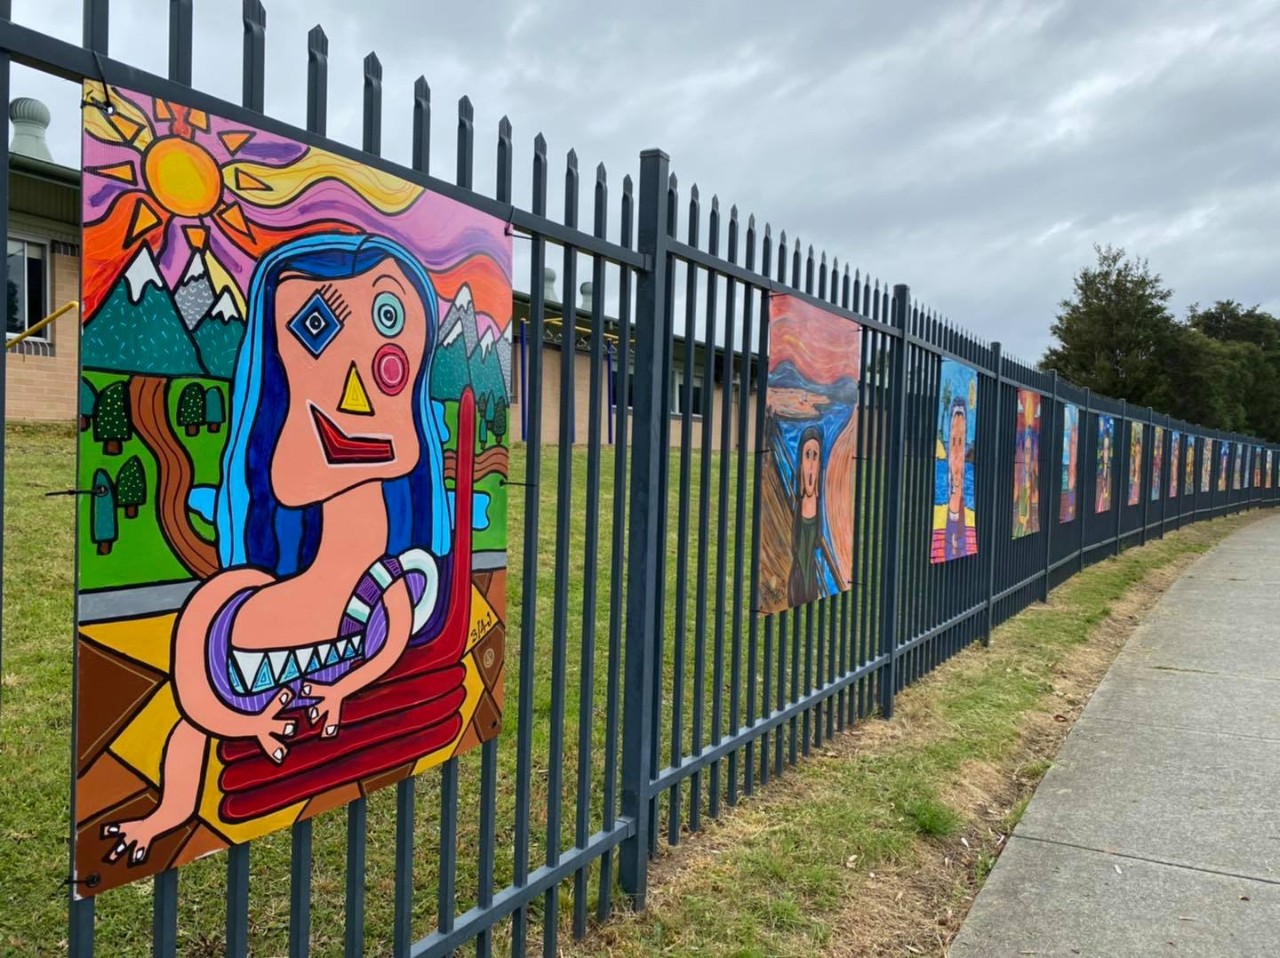 Large painted portraits mounted on a school fence.